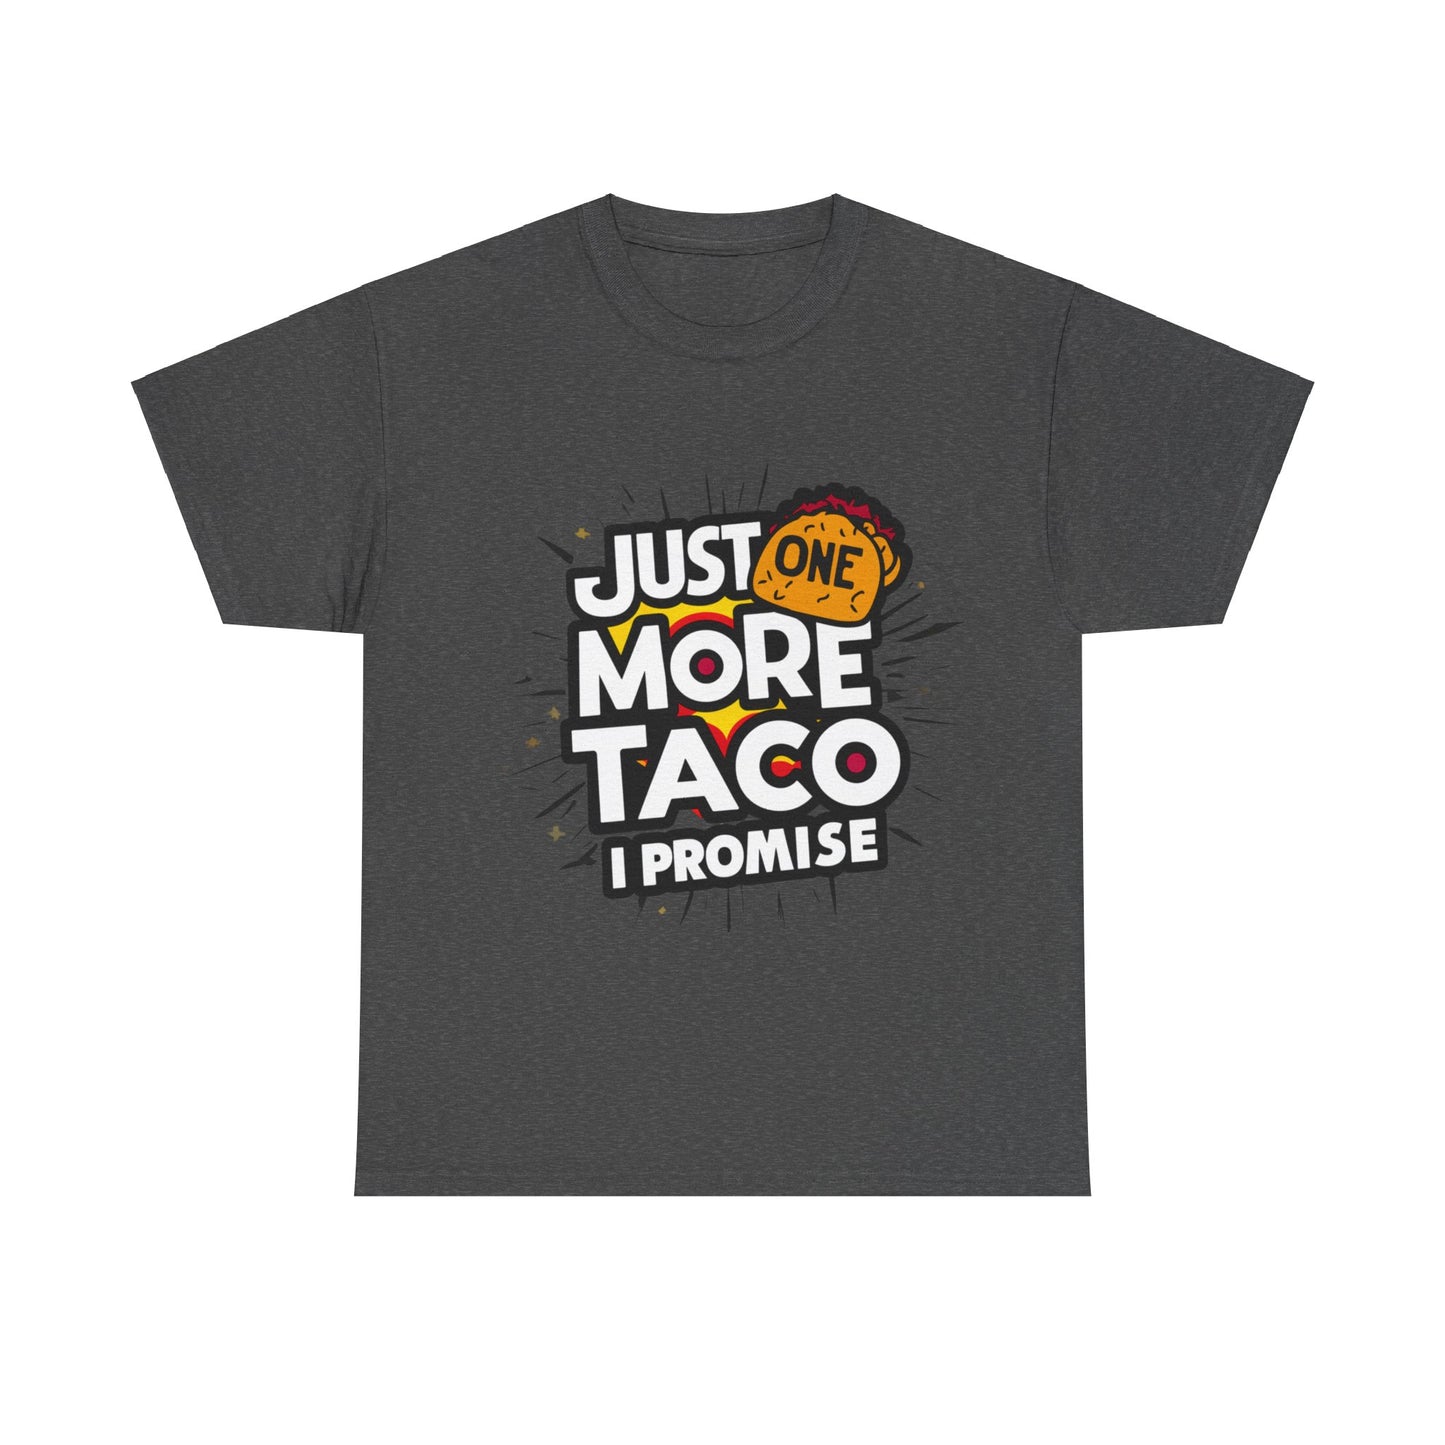 Copy of Just One More Taco I Promise Mexican Food Graphic Unisex Heavy Cotton Tee Cotton Funny Humorous Graphic Soft Premium Unisex Men Women Dark Heather T-shirt Birthday Gift-4